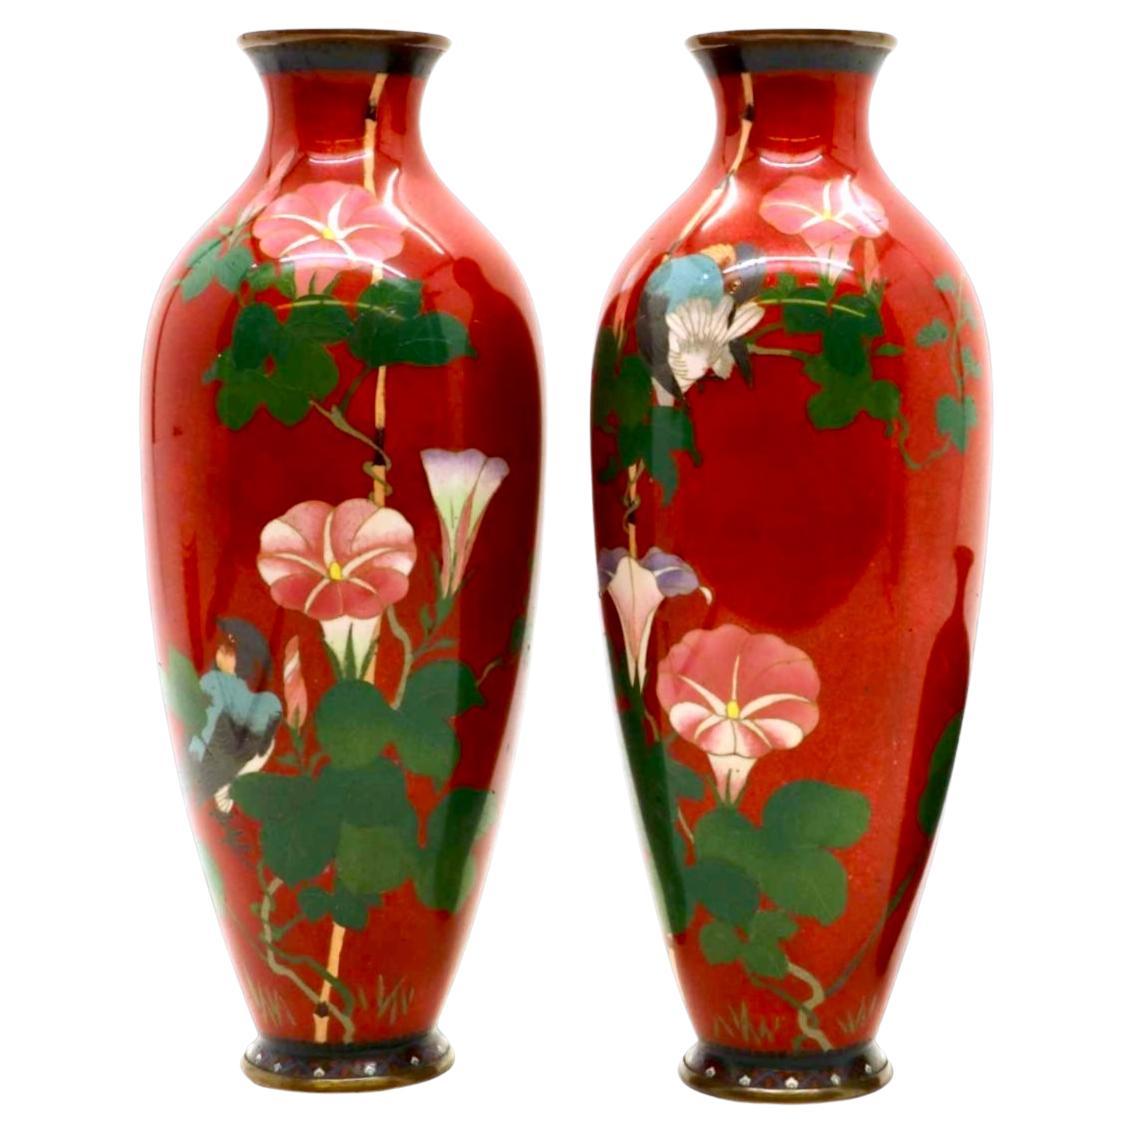 Exquisite Japanese Cloisonne Enamel Pair of Tall Vases.Meiji period   For Sale